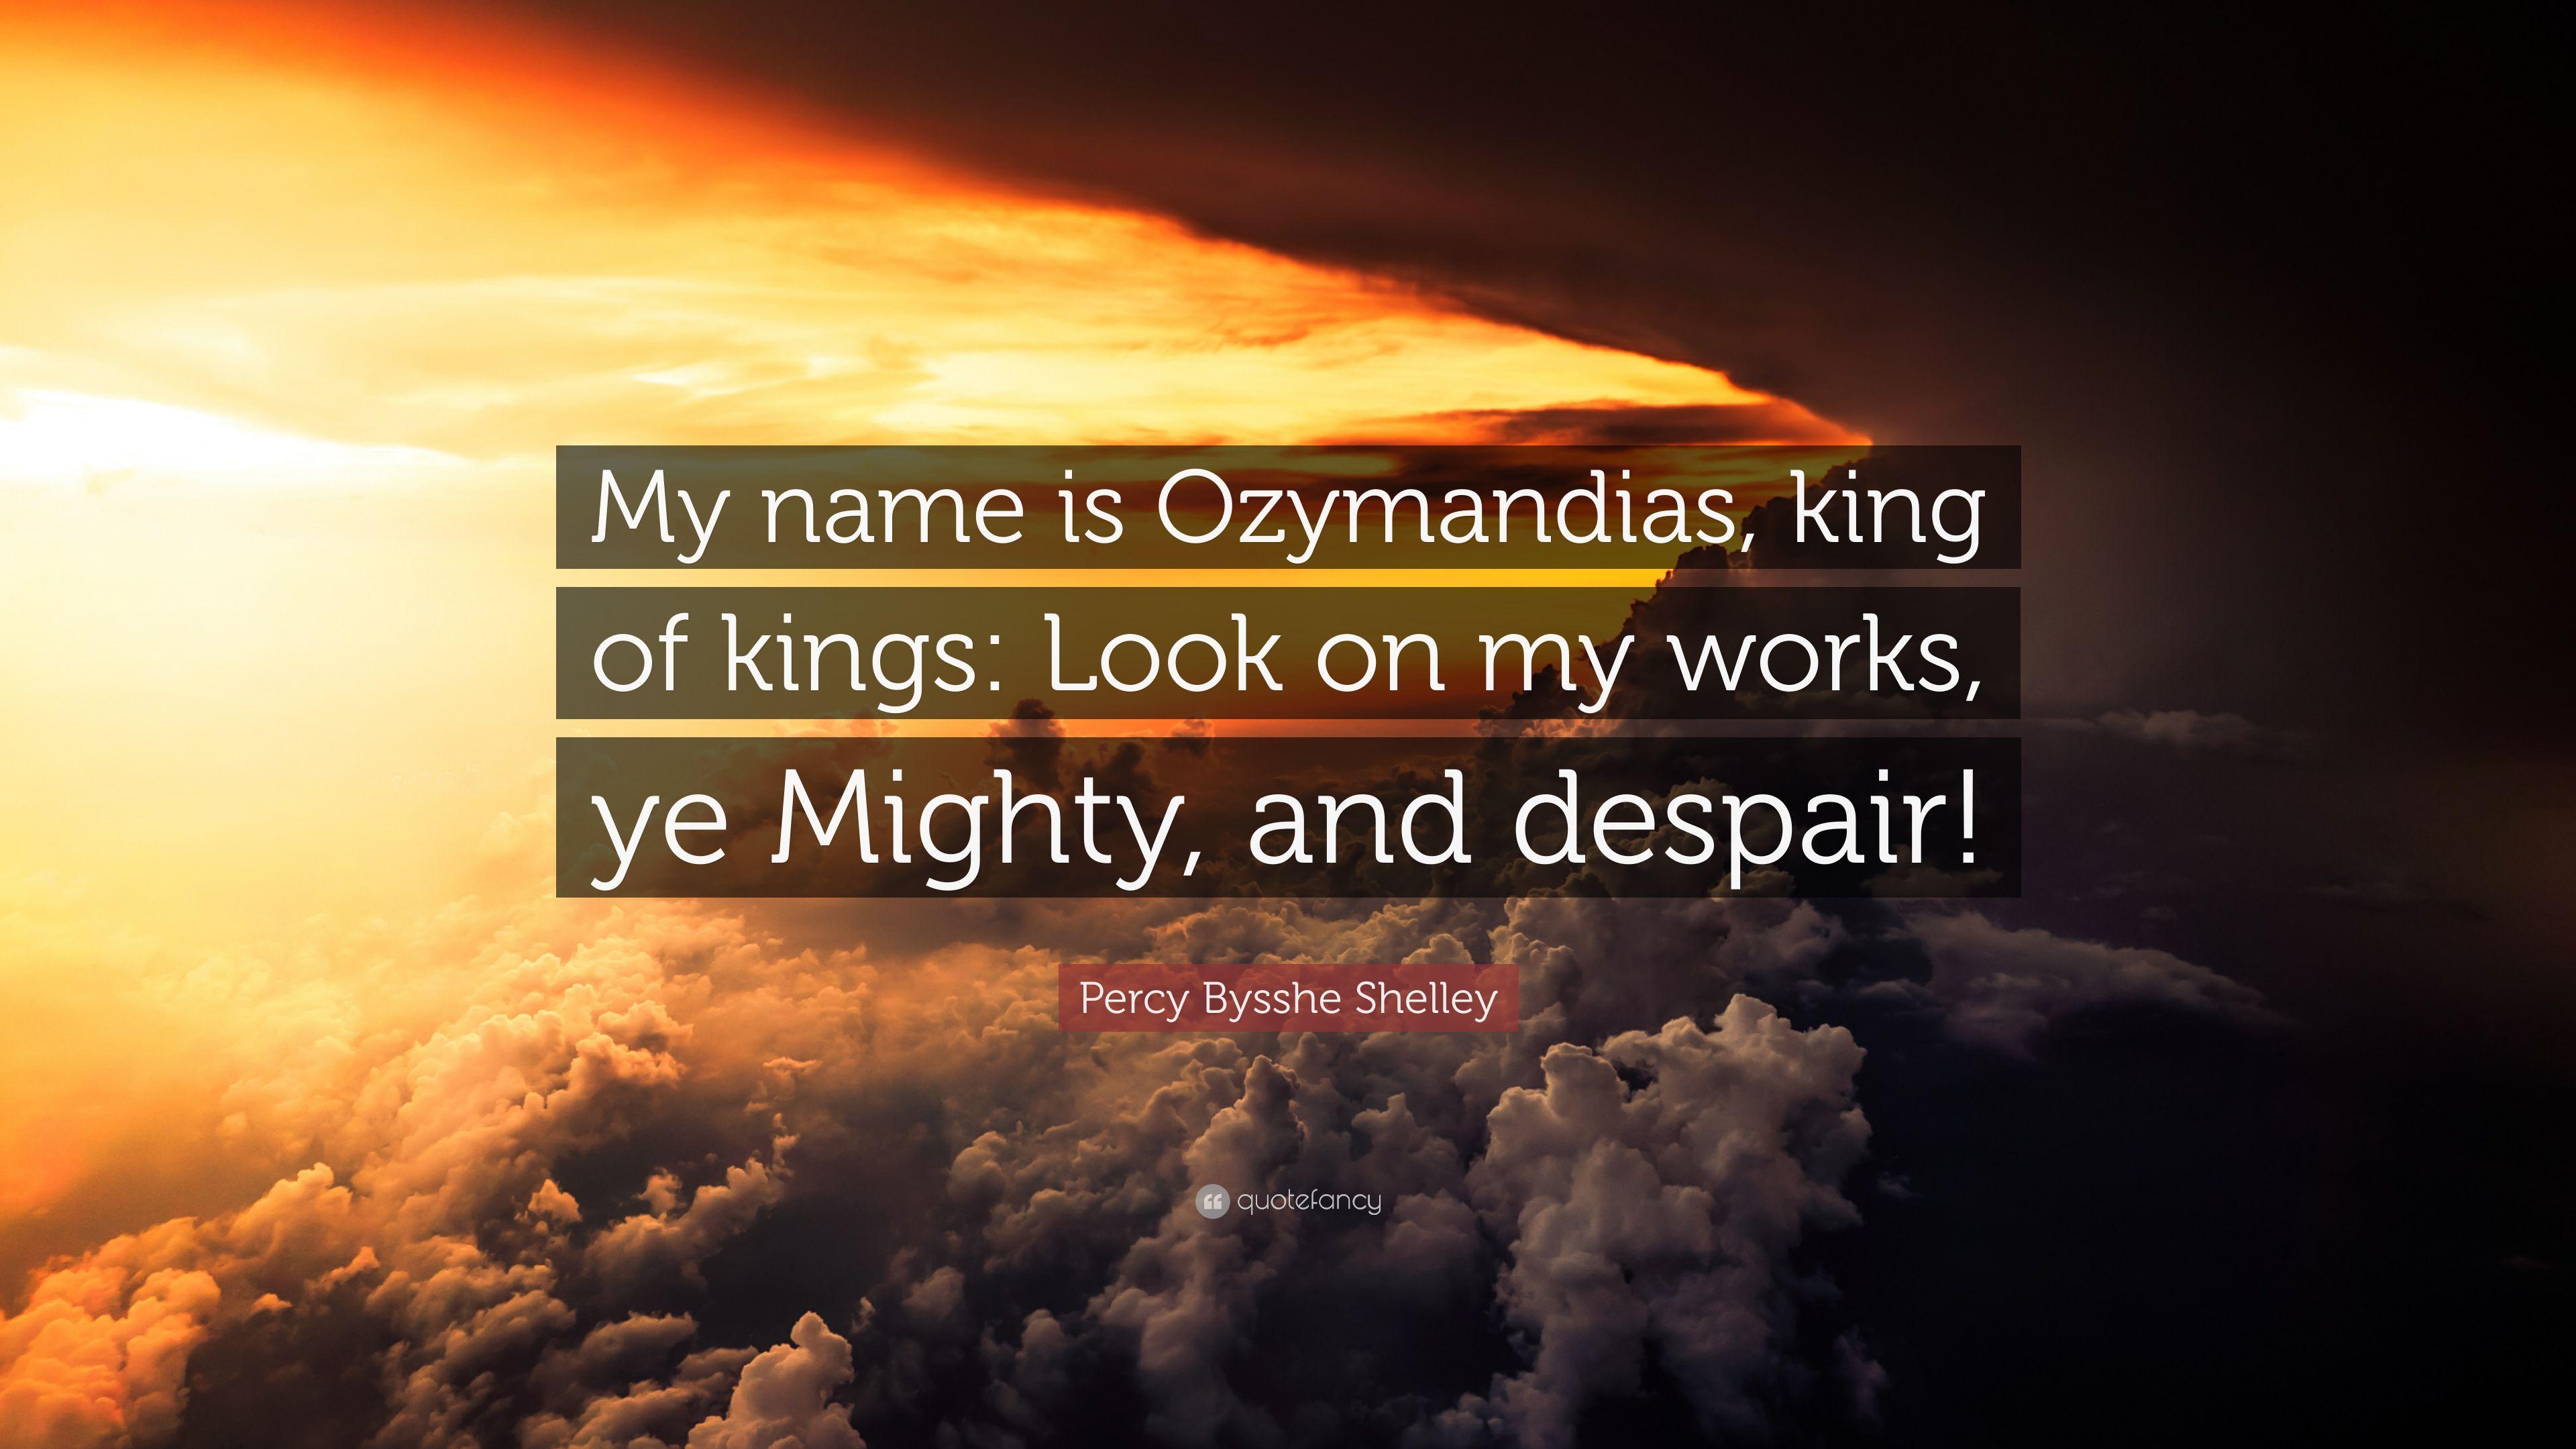 Percy Bysshe Shelley Quote: “My name is Ozymandias, king of kings